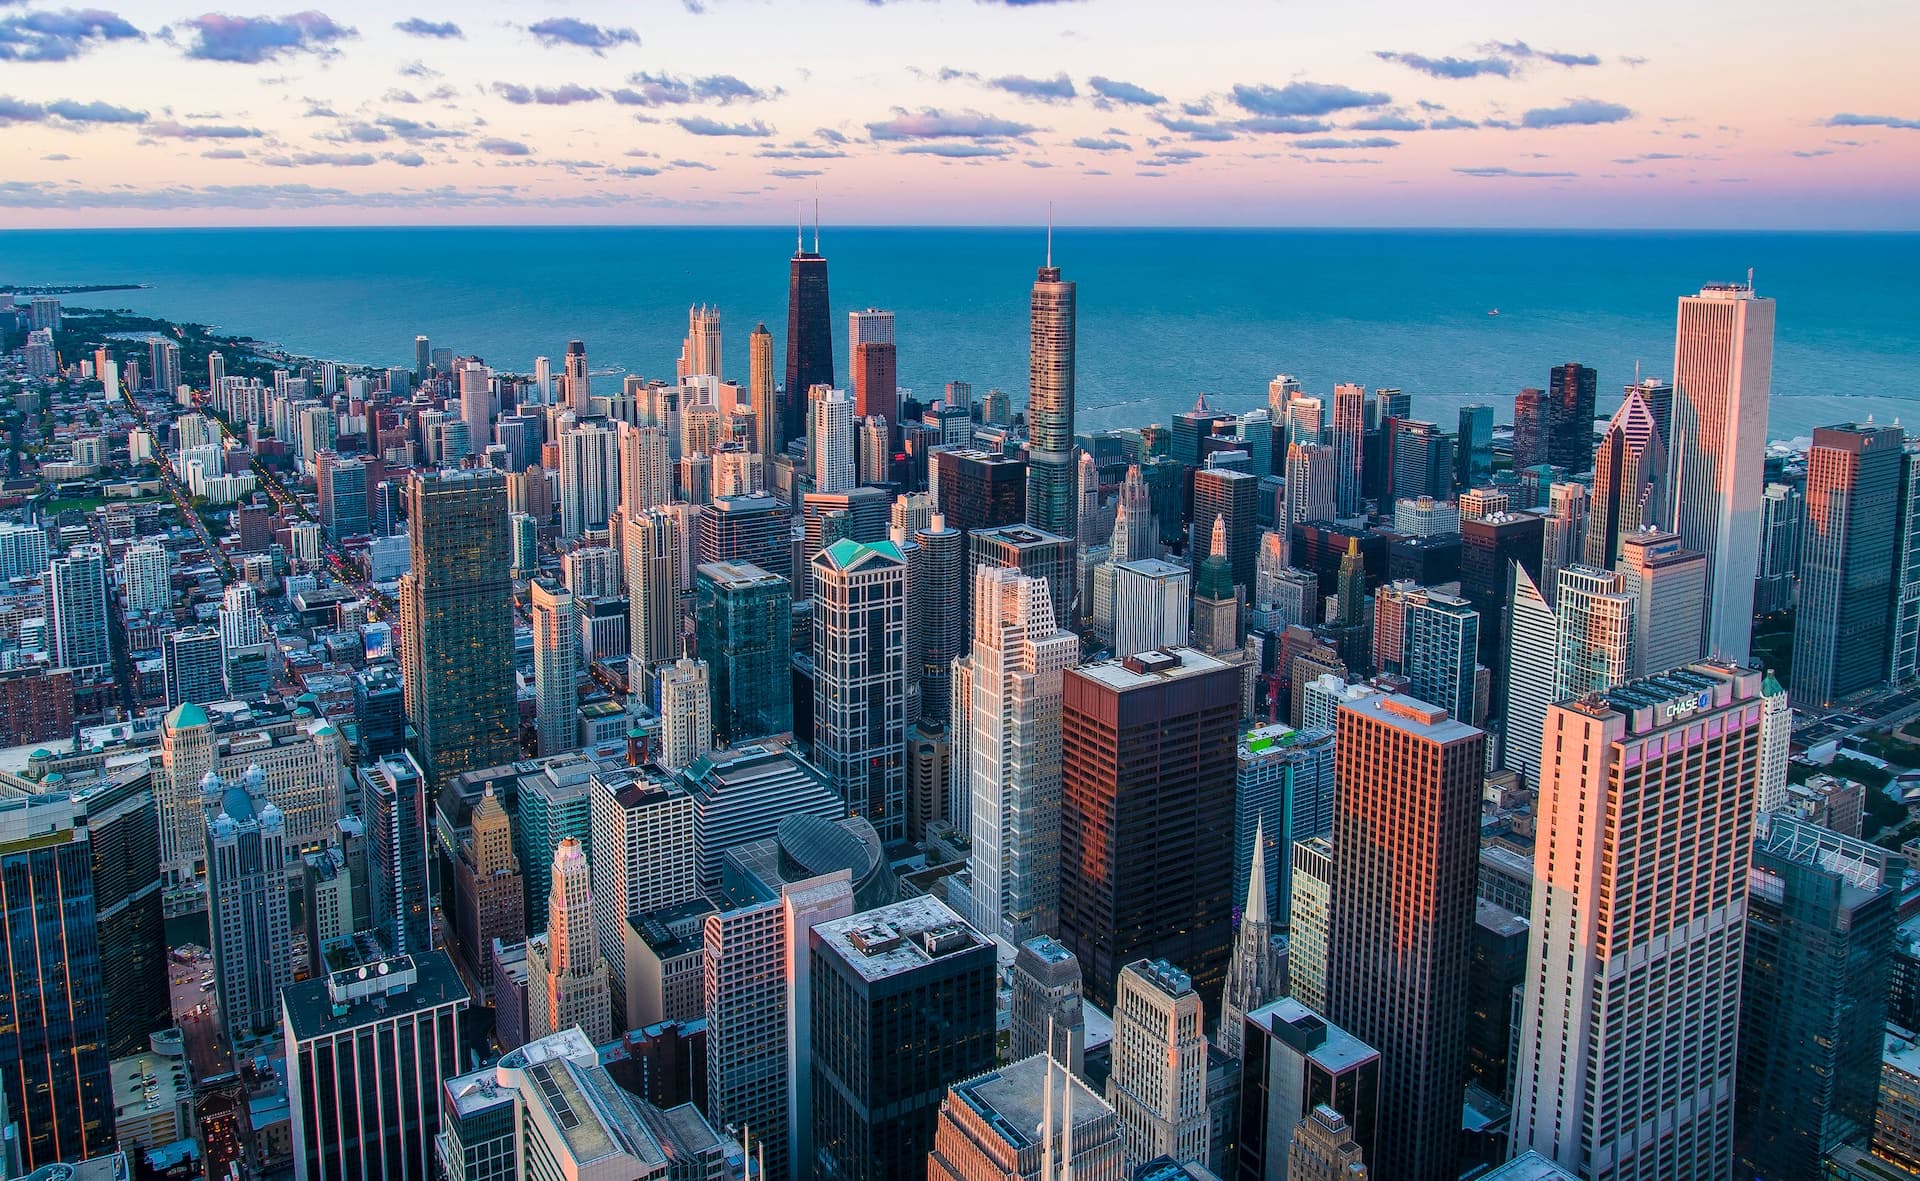 Chicago, USA: The Birthplace of Skyscrapers